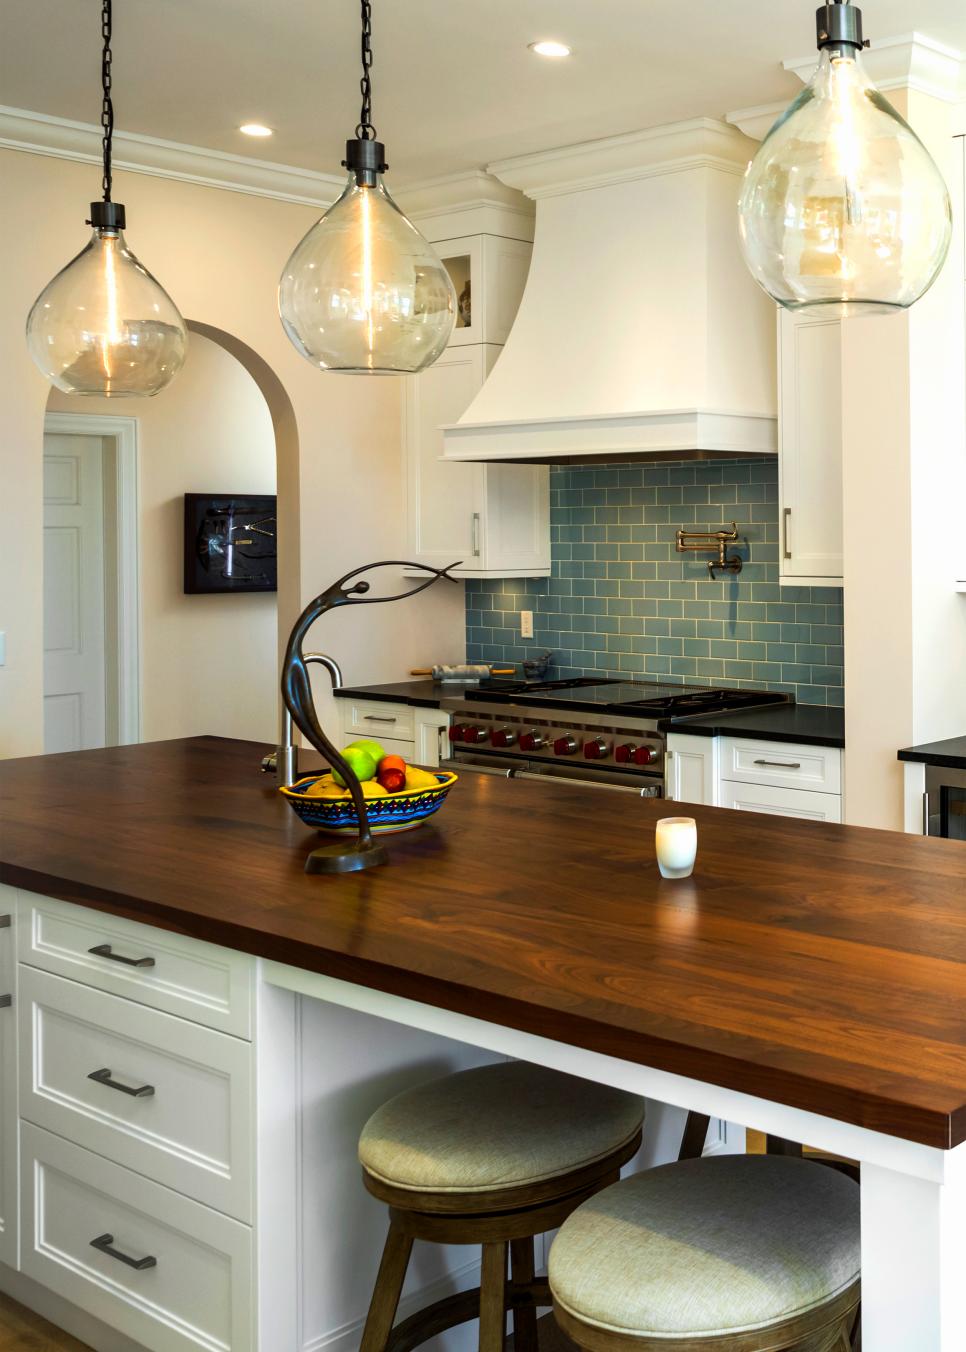 Delicate Glass Pendant Lights Add Curves to Transitional Kitchen | HGTV